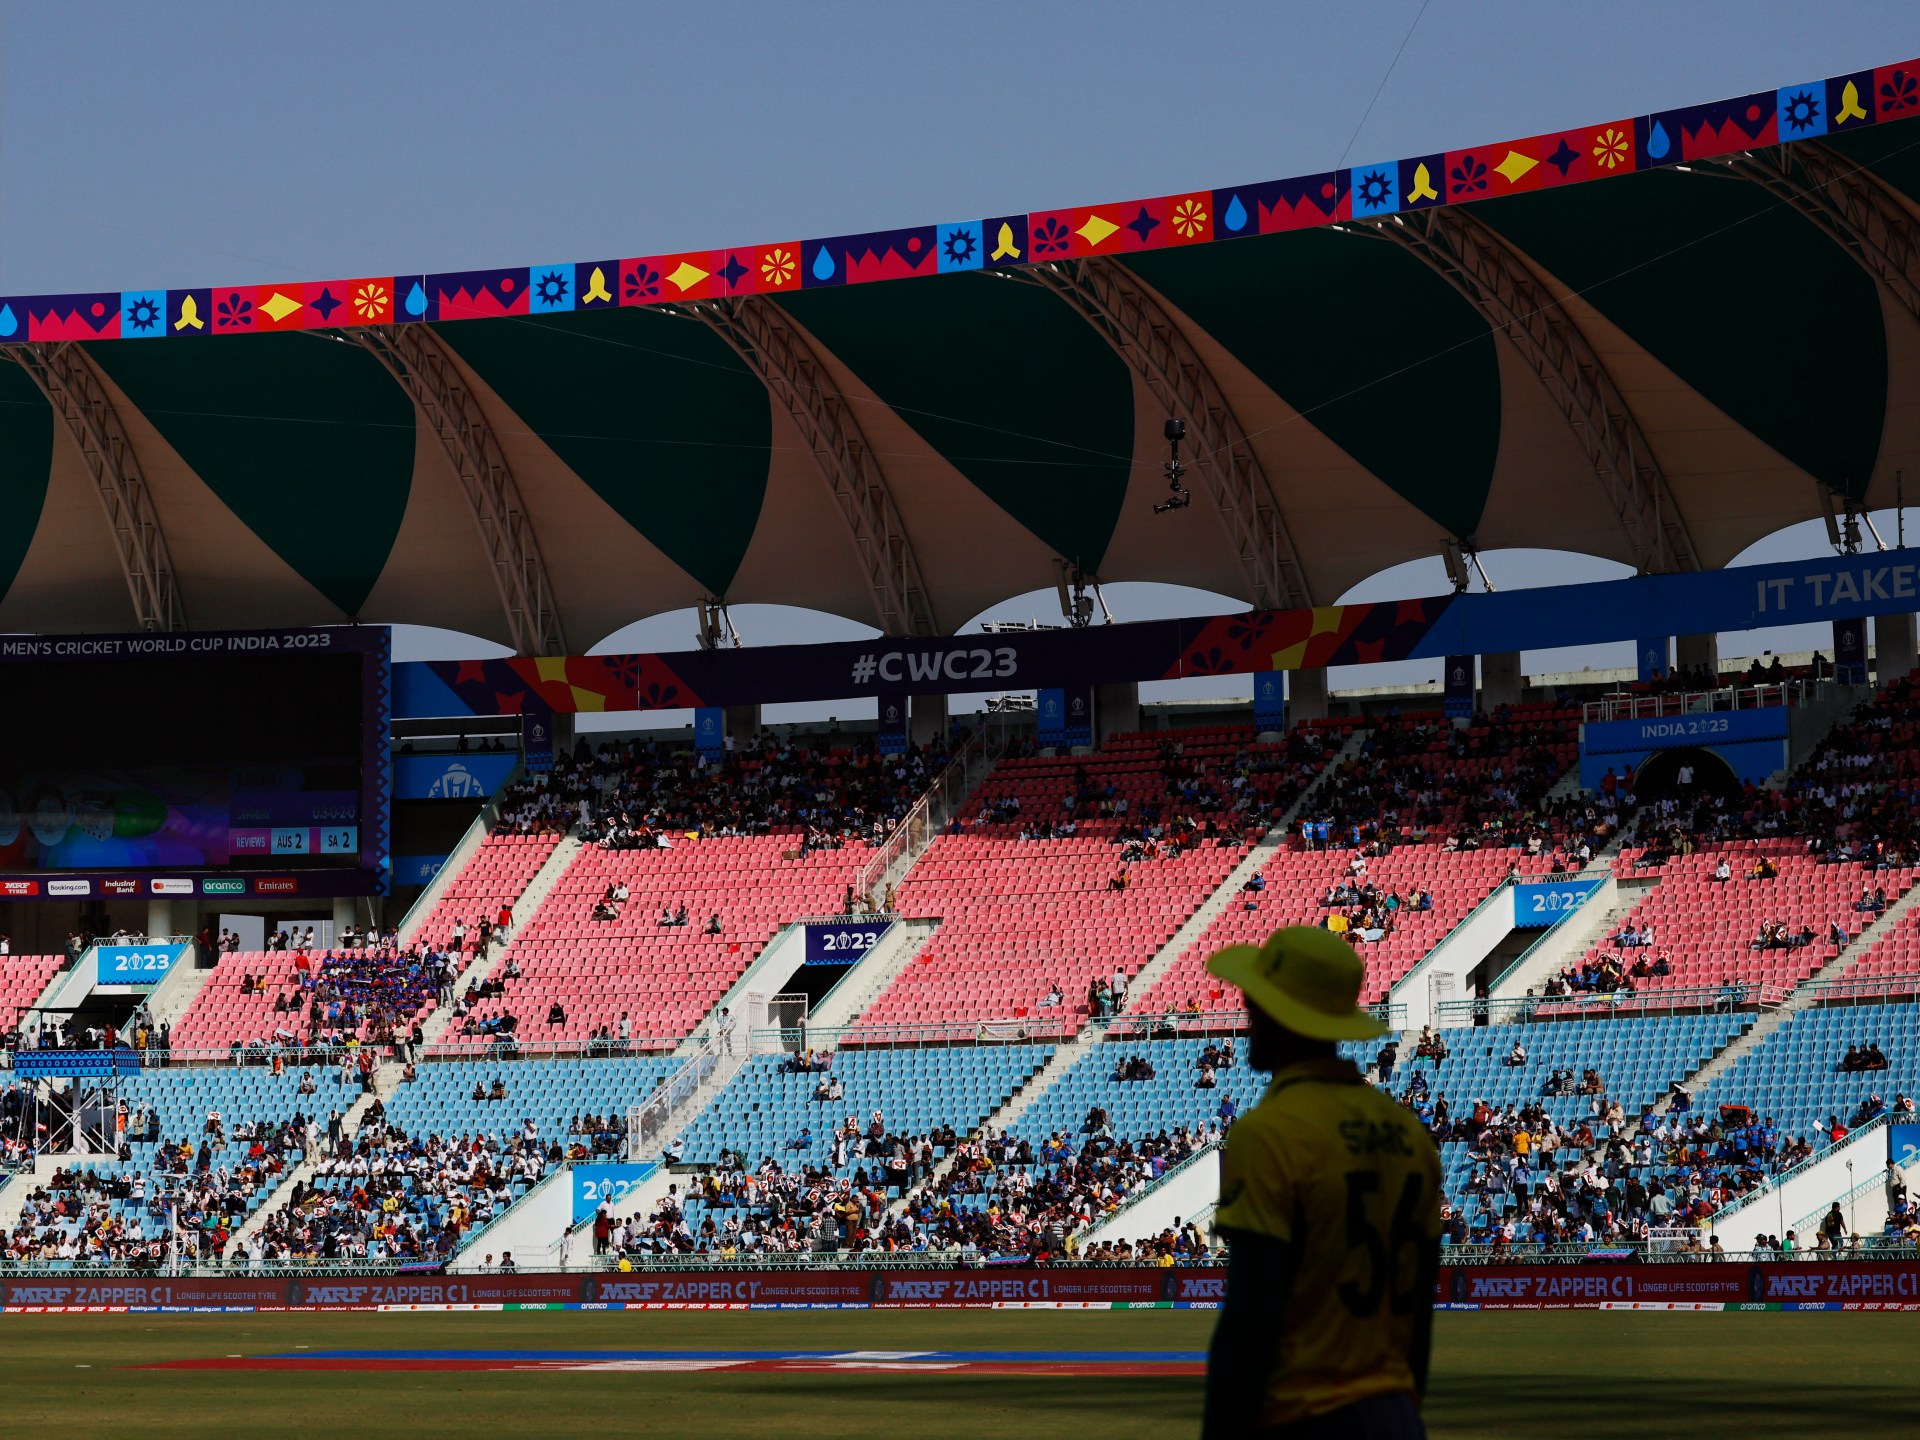 ‘I anticipated higher’: Why so many empty seats on the Cricket World Cup in India?  |  ICC Cricket World Cup Information